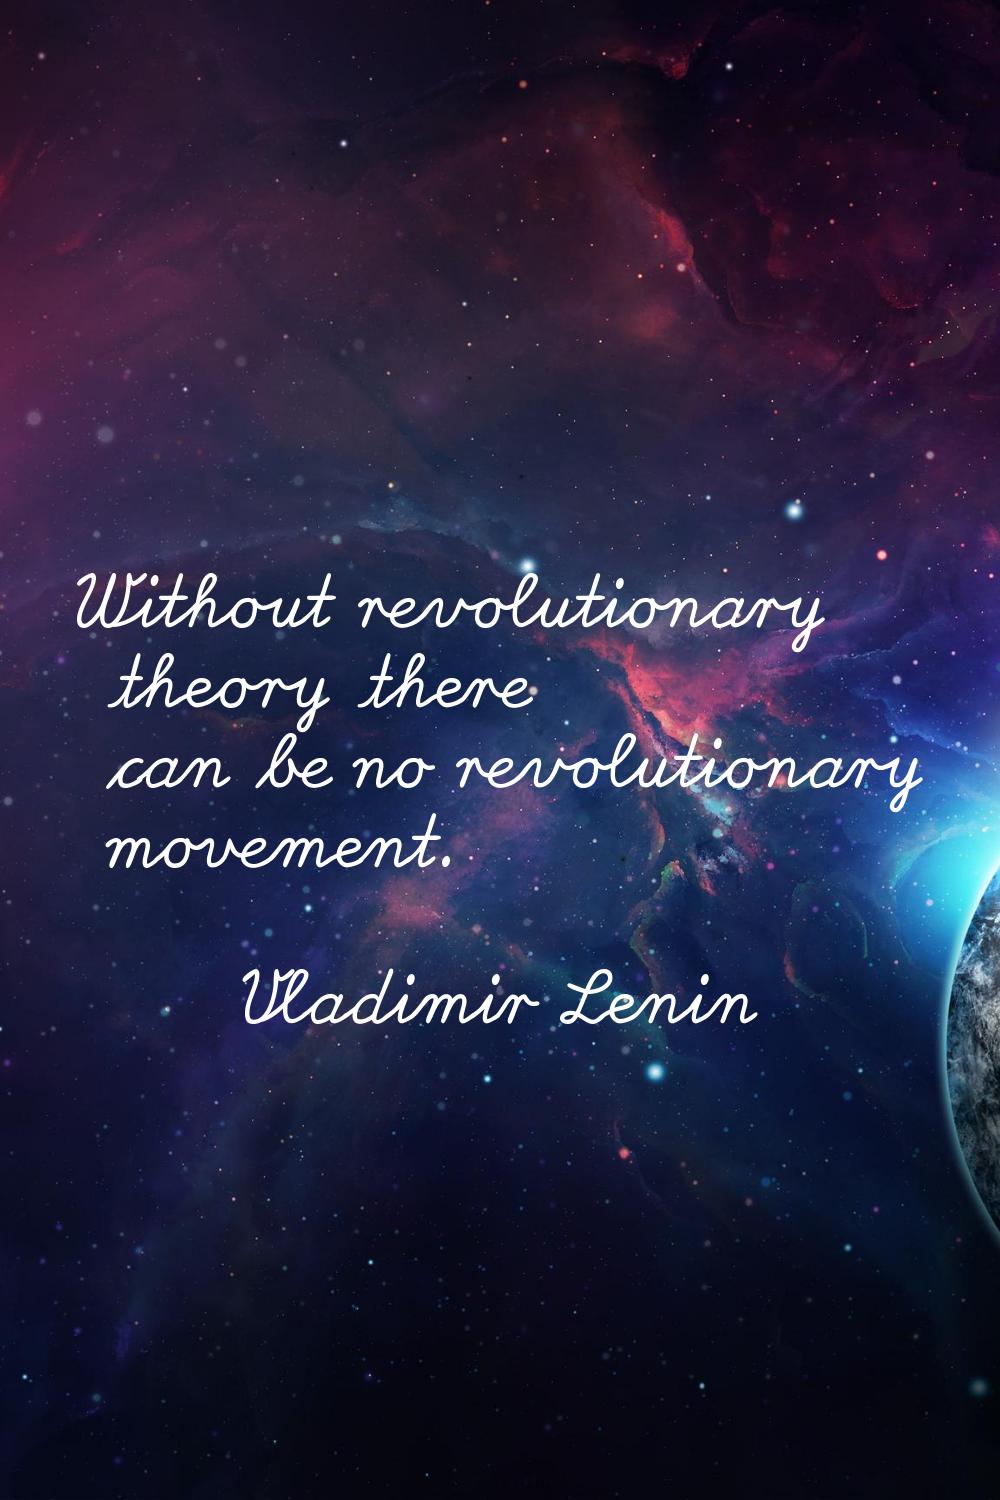 Without revolutionary theory there can be no revolutionary movement.